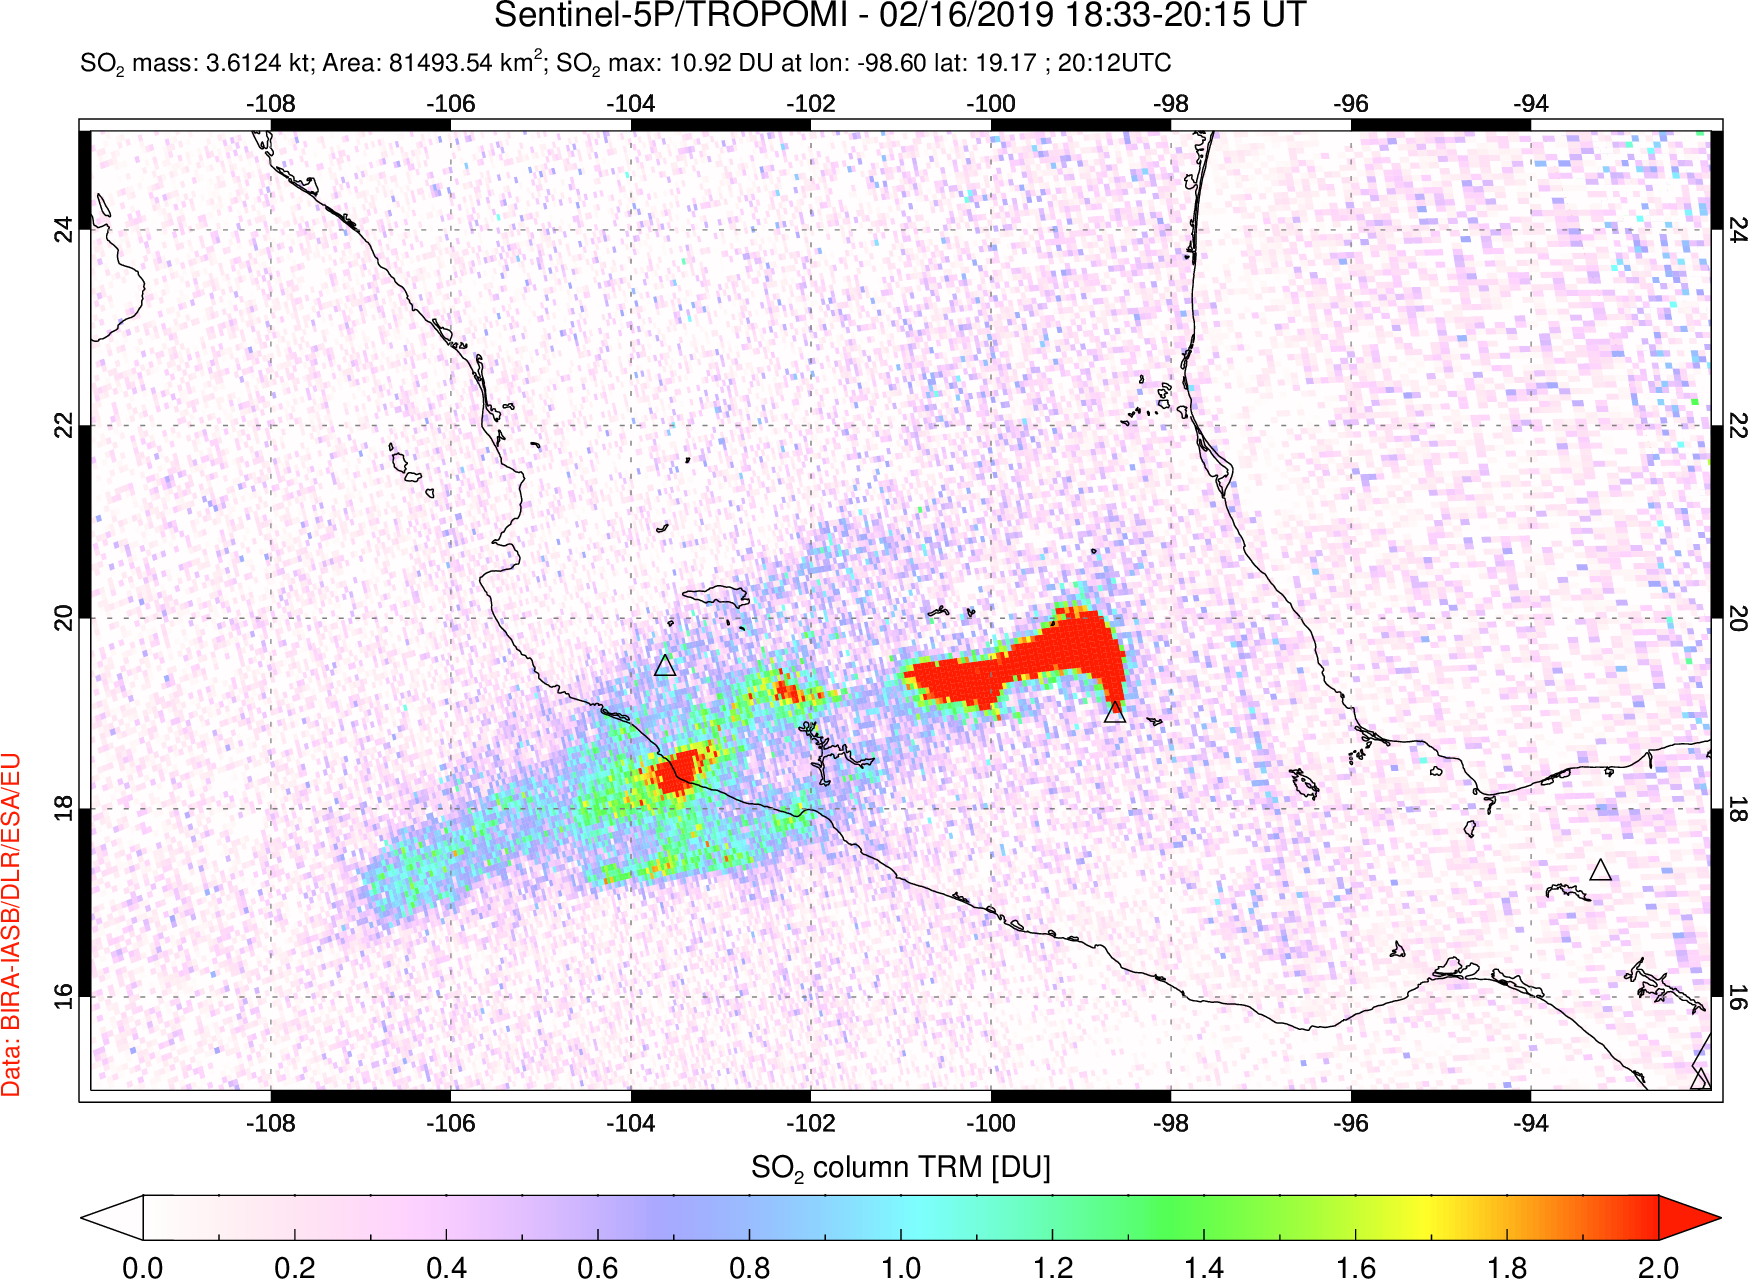 A sulfur dioxide image over Mexico on Feb 16, 2019.